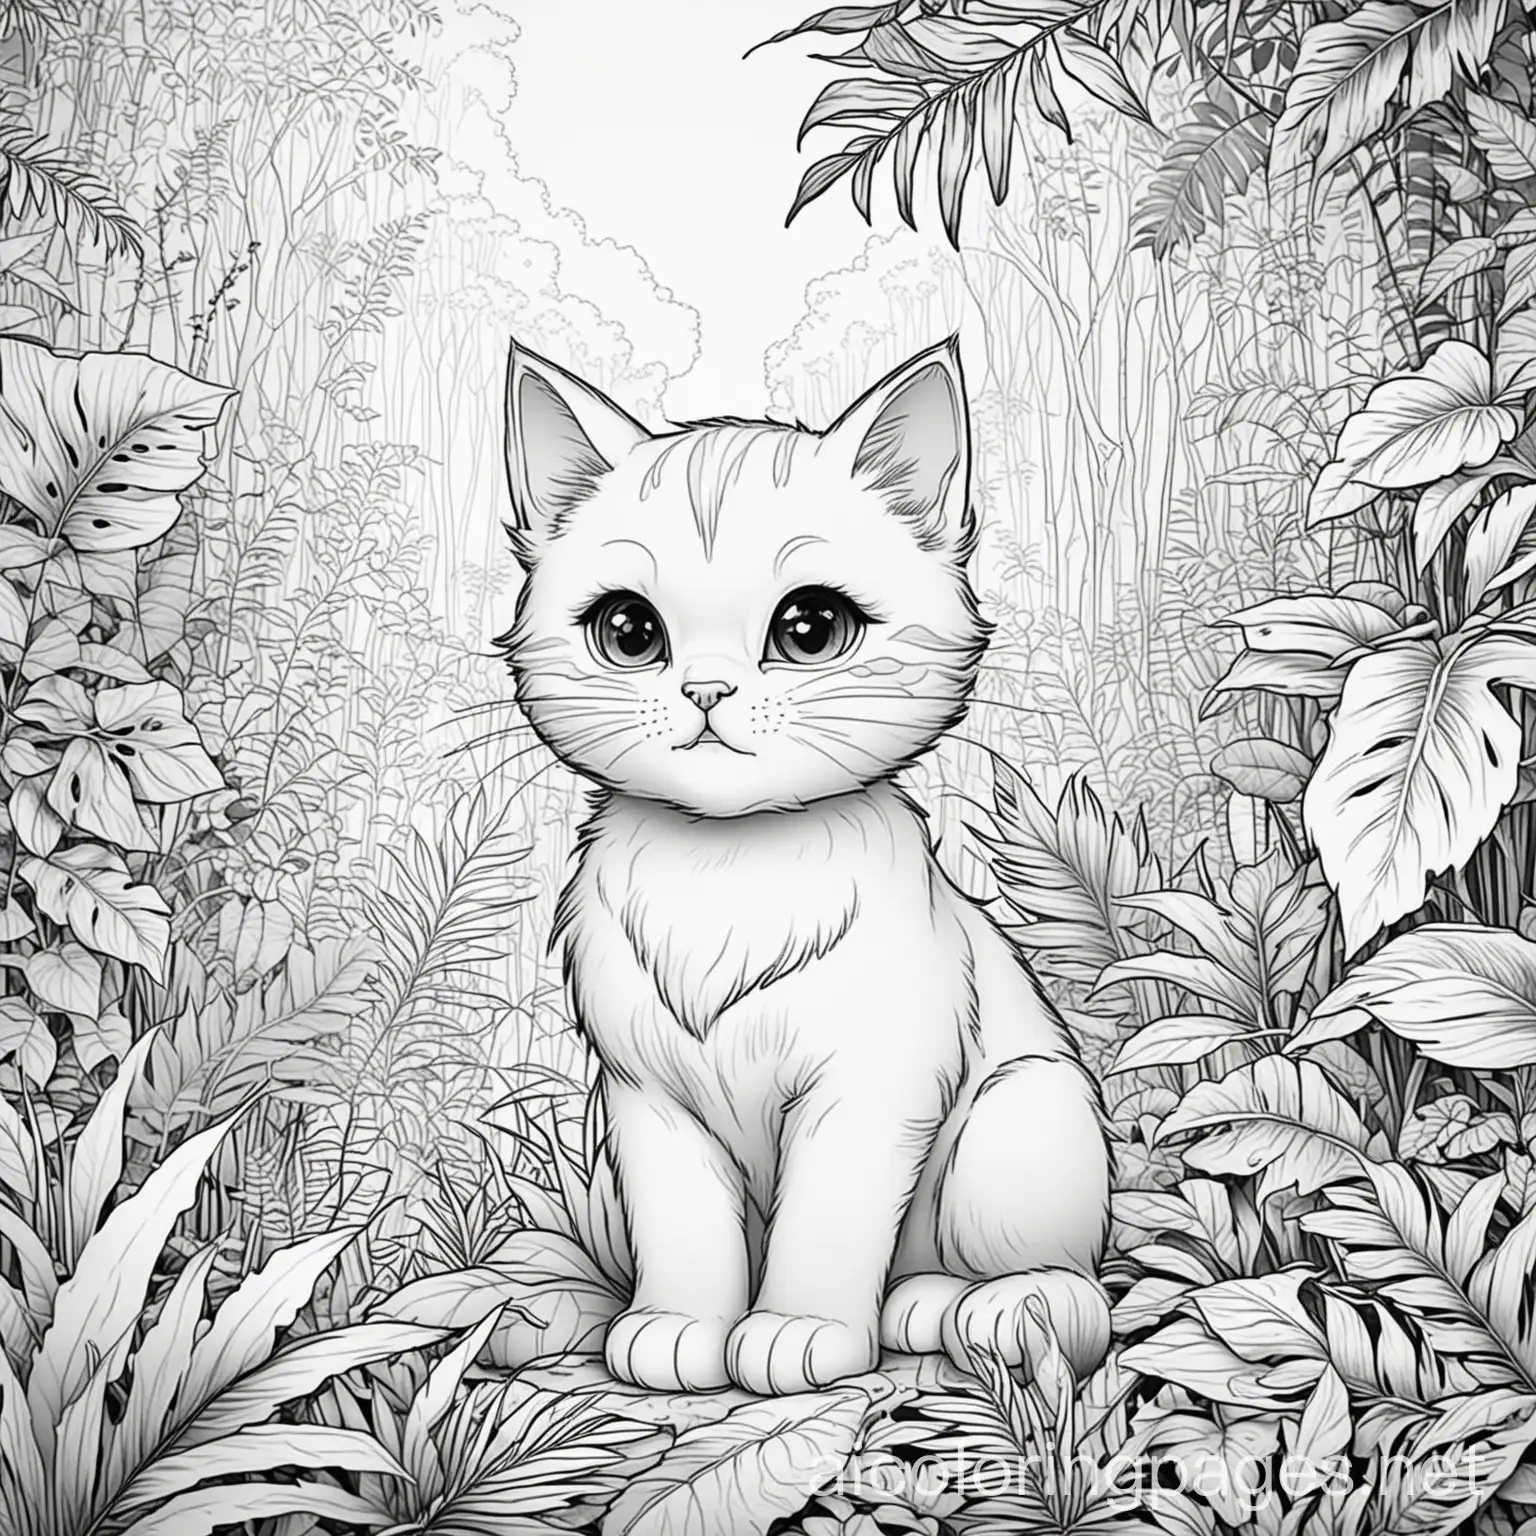 Kitty in the jungle, Coloring Page, black and white, line art, white background, Simplicity, Ample White Space. The background of the coloring page is plain white to make it easy for young children to color within the lines. The outlines of all the subjects are easy to distinguish, making it simple for kids to color without too much difficulty